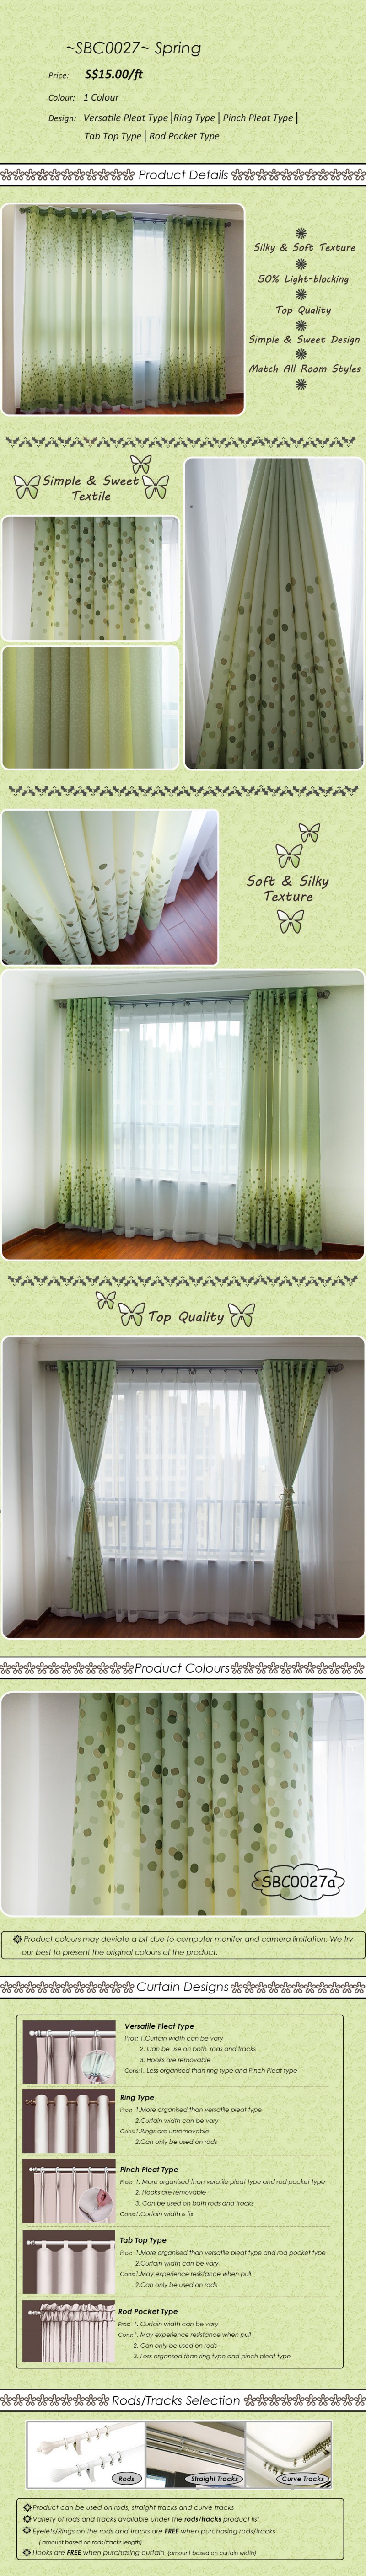 Curtain Singapore, Ming's Living, blackout curtain Singapore, budget curtain Singapore, curtain supplier, roller blinds